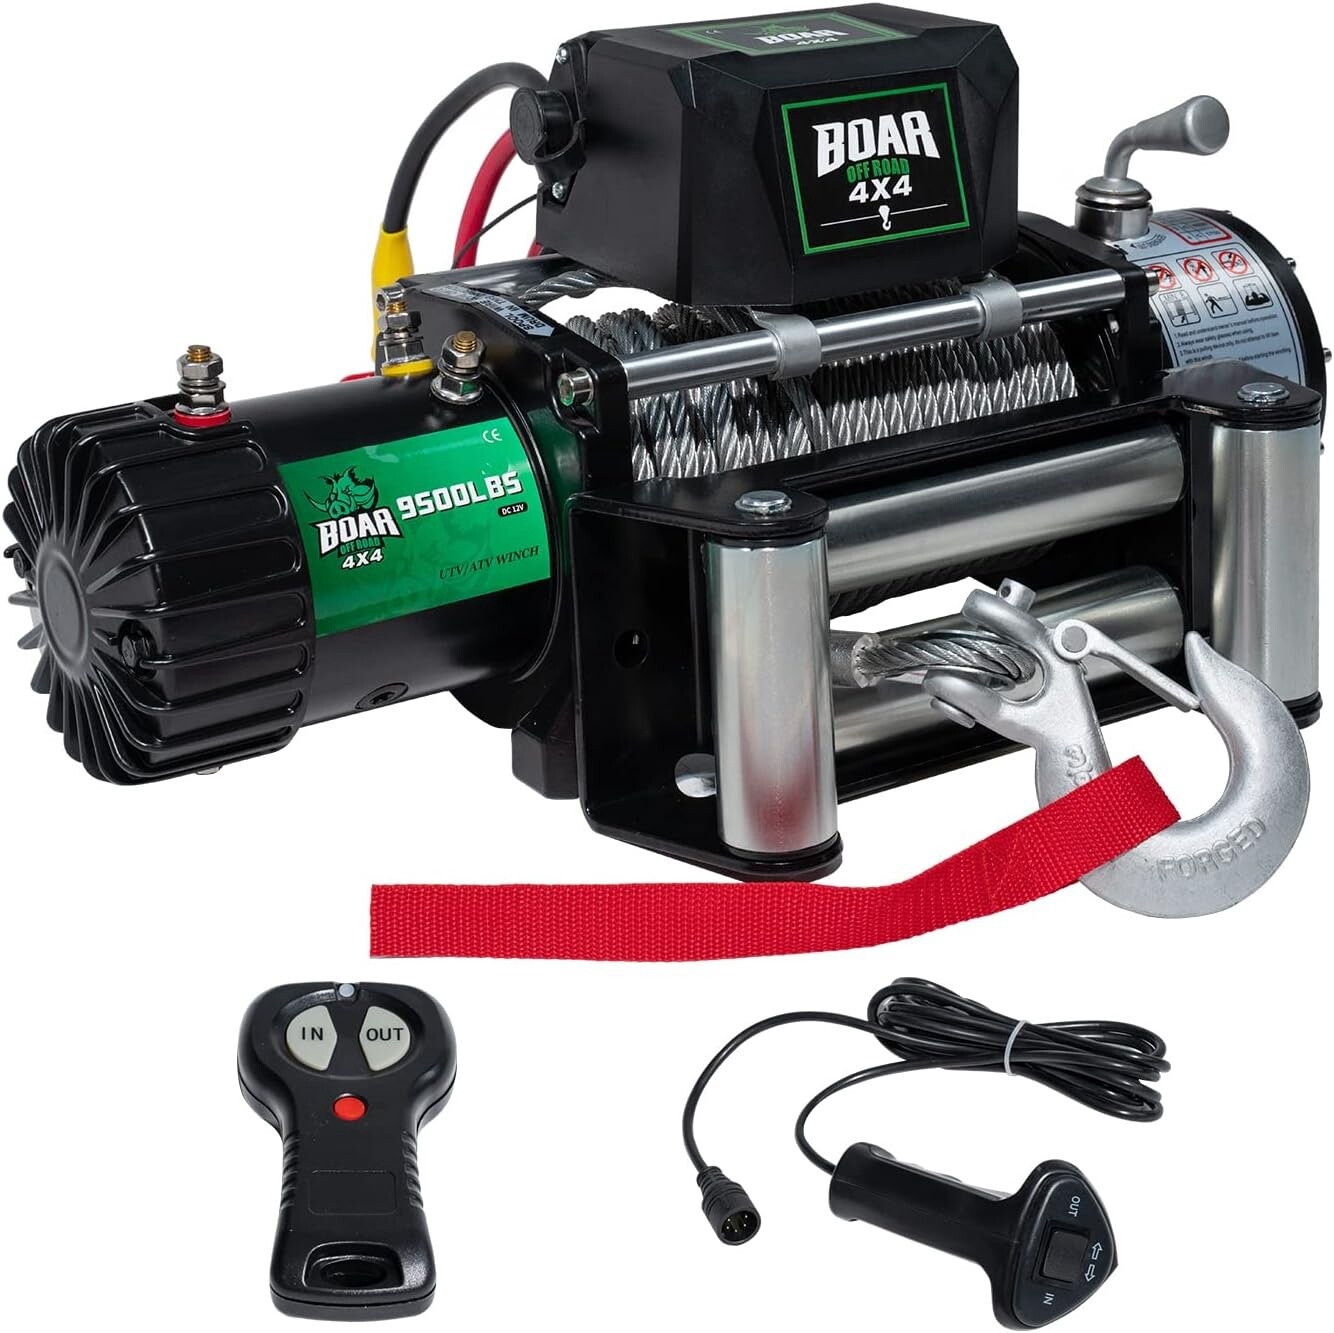 BOAR 9500 Lb Winch, Electric Winch 12V with Synthetic Rope, Waterproof IP67 UTV ATV CAR HAULER Winch with Wireless Remote and Wired Control